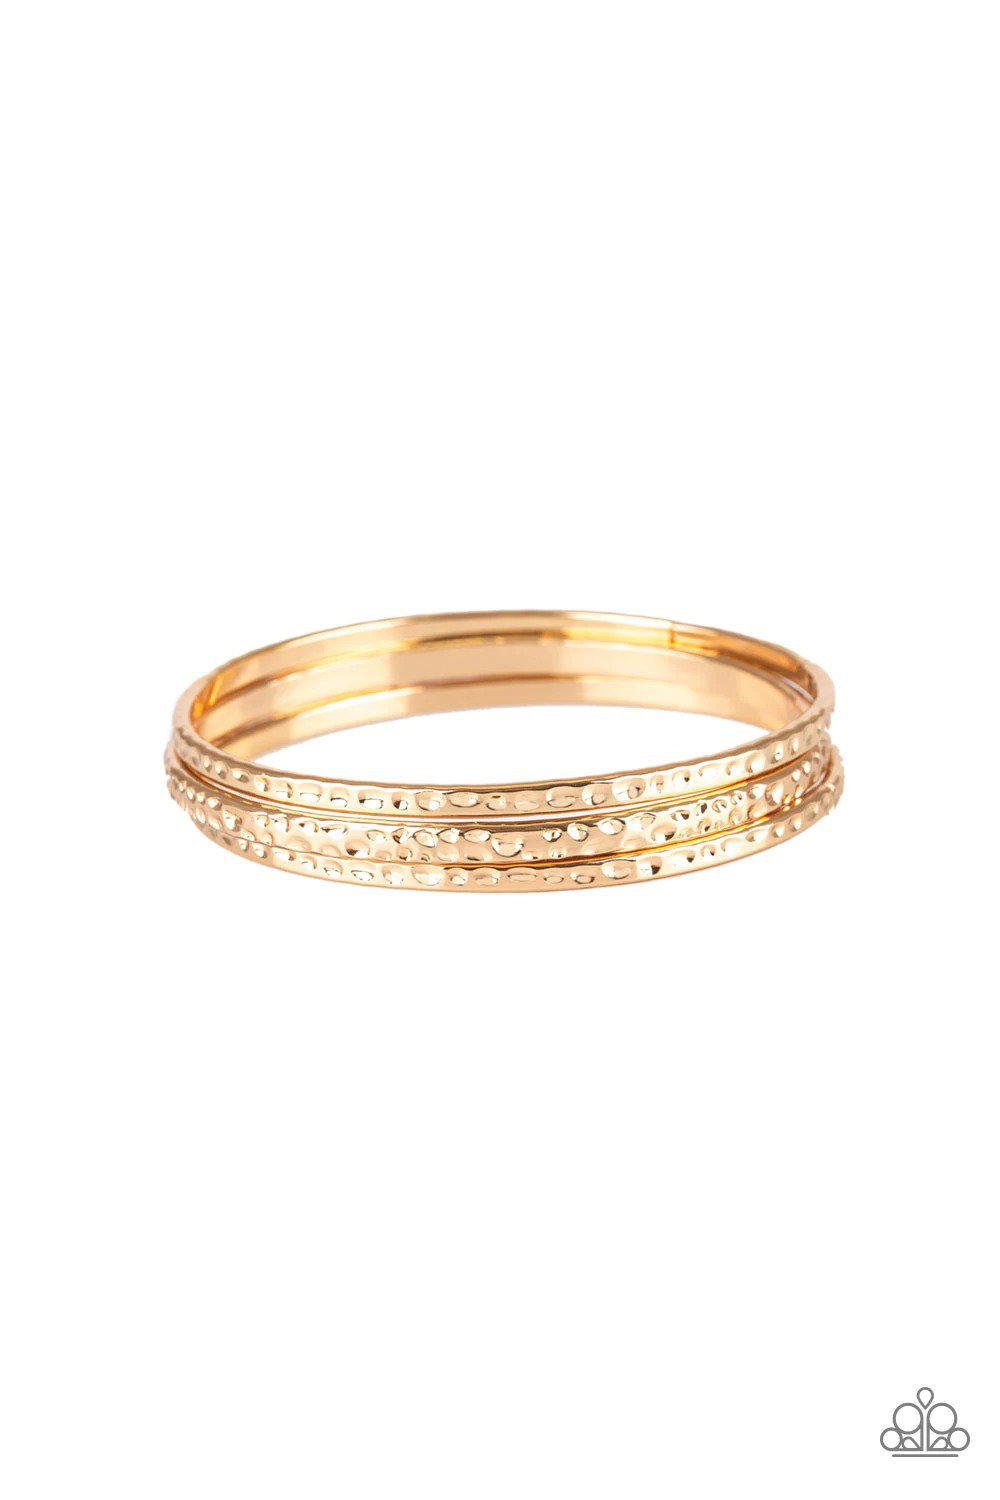 Casually Couture Gold Bangle Bracelet- lightbox - CarasShop.com - $5 Jewelry by Cara Jewels